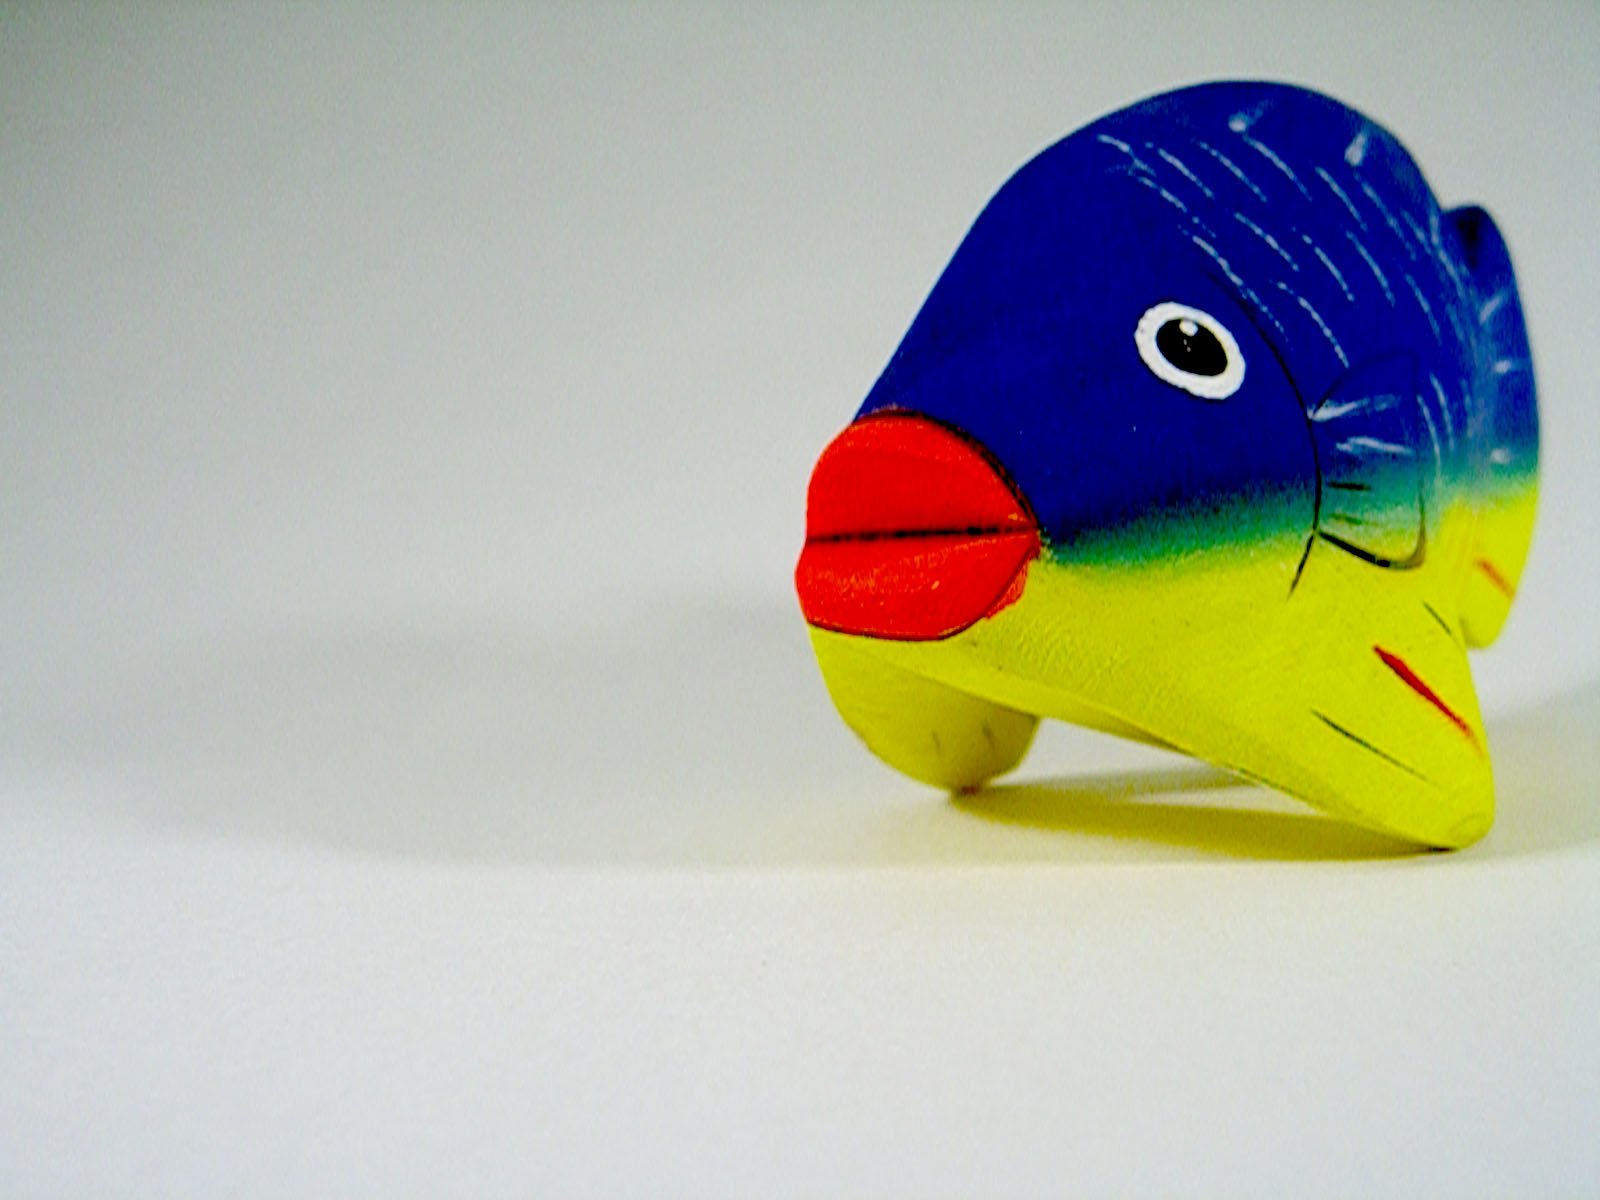 a toy that is colorful and has a fish on it